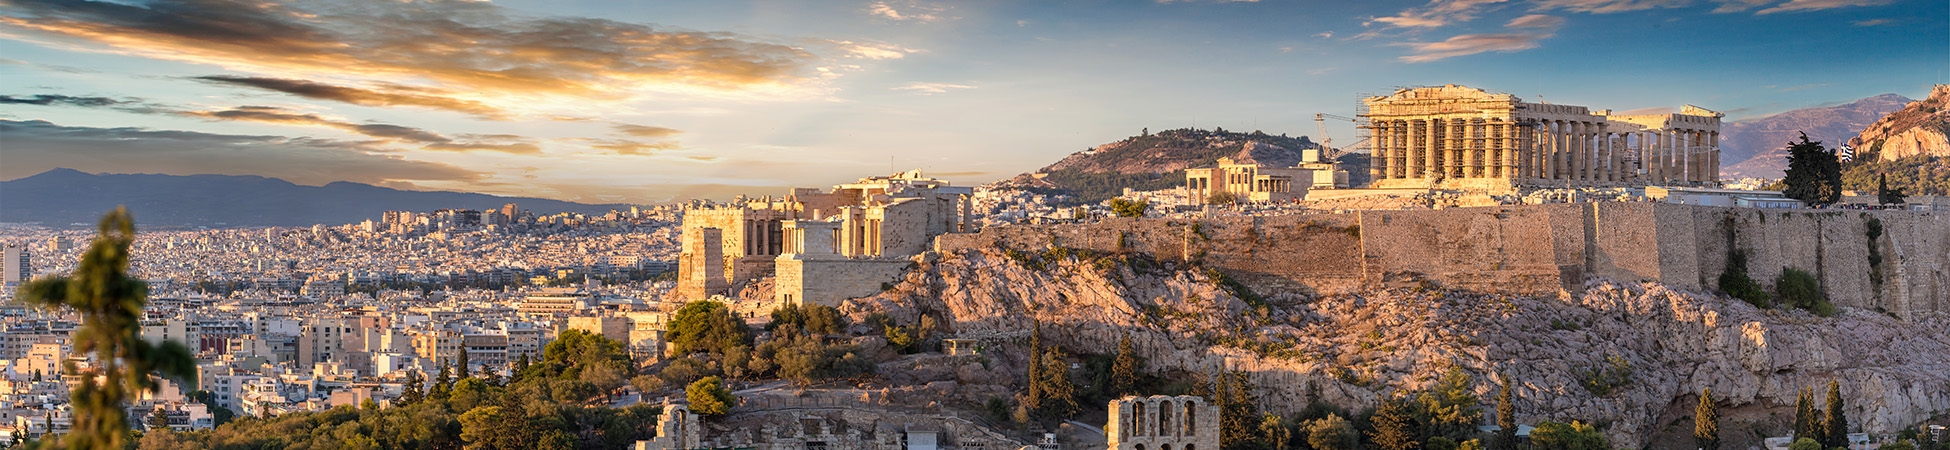 skyline view of ruins of acropolis during the sunny day, Athens